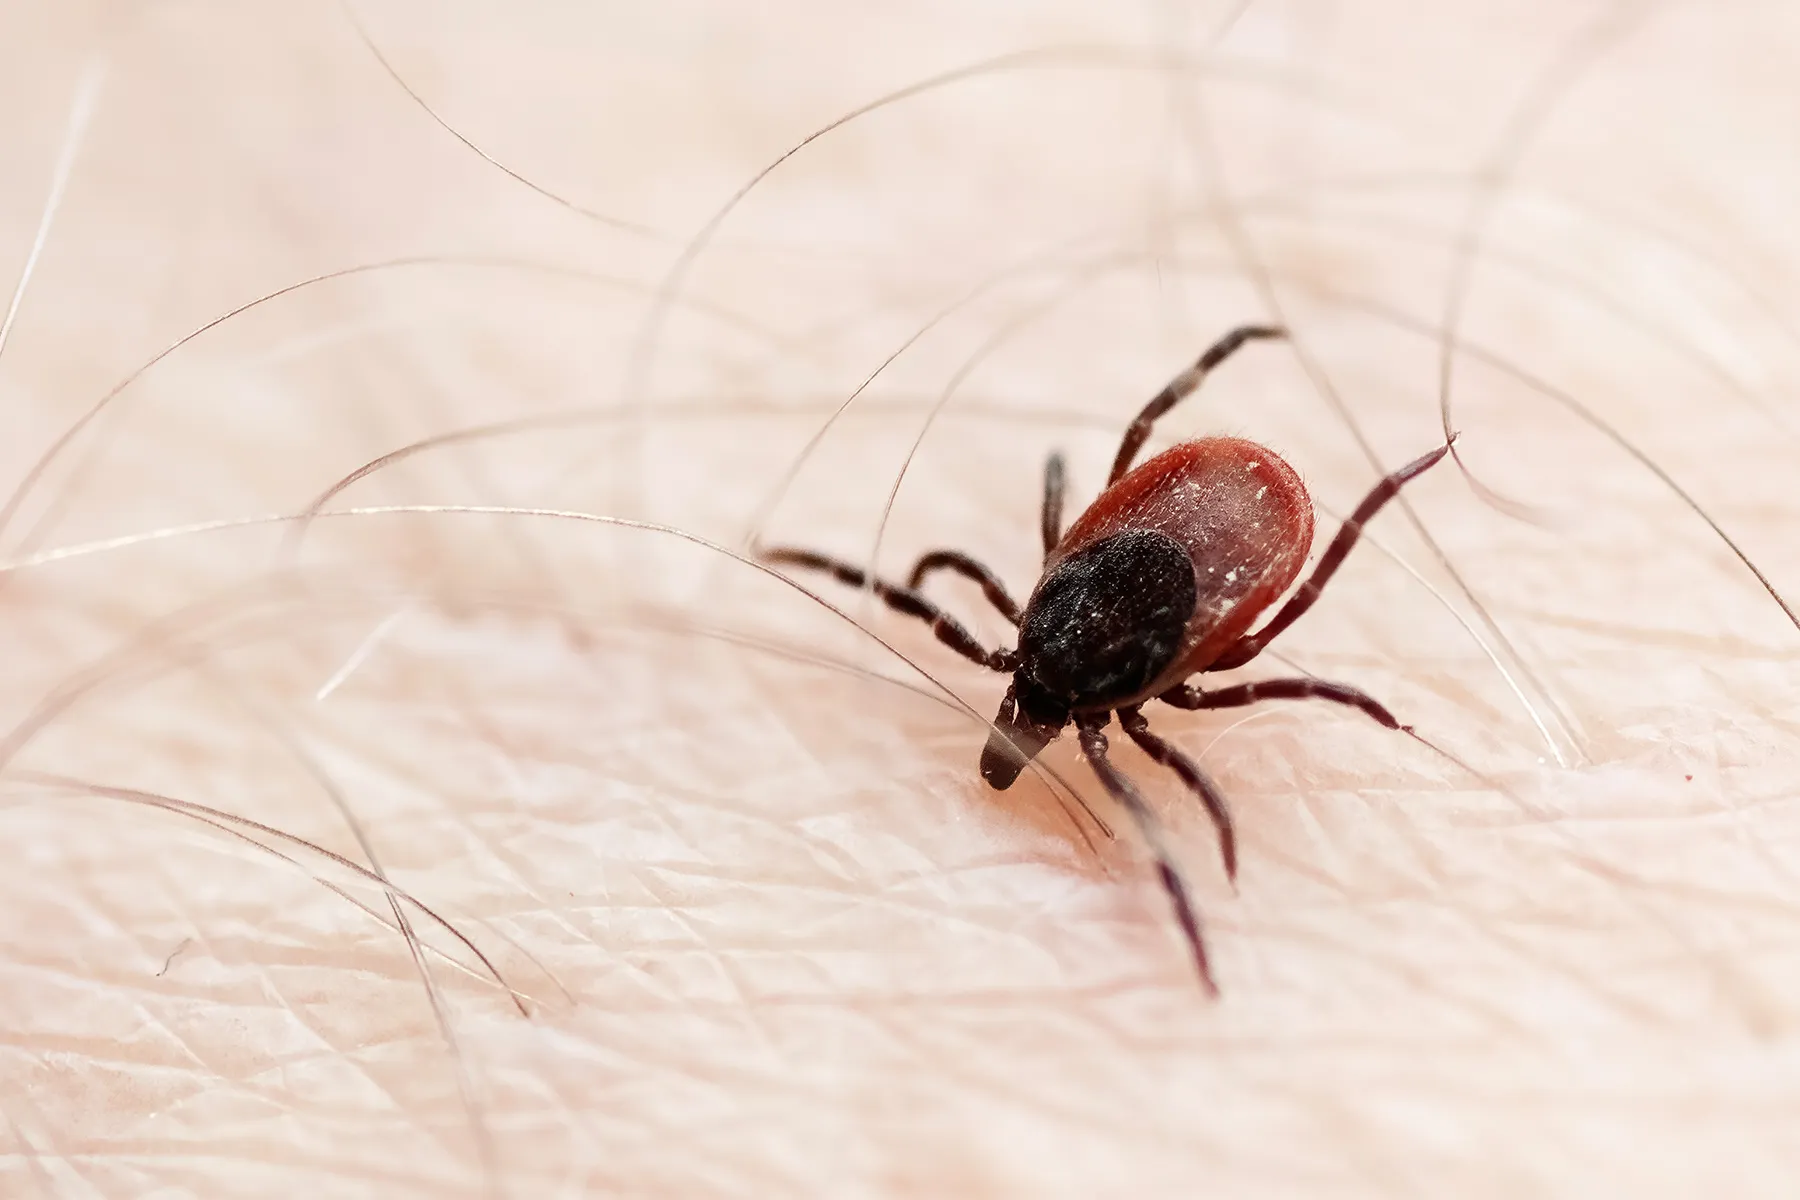 New Lyme Disease Test Could Help Identify Illness Sooner